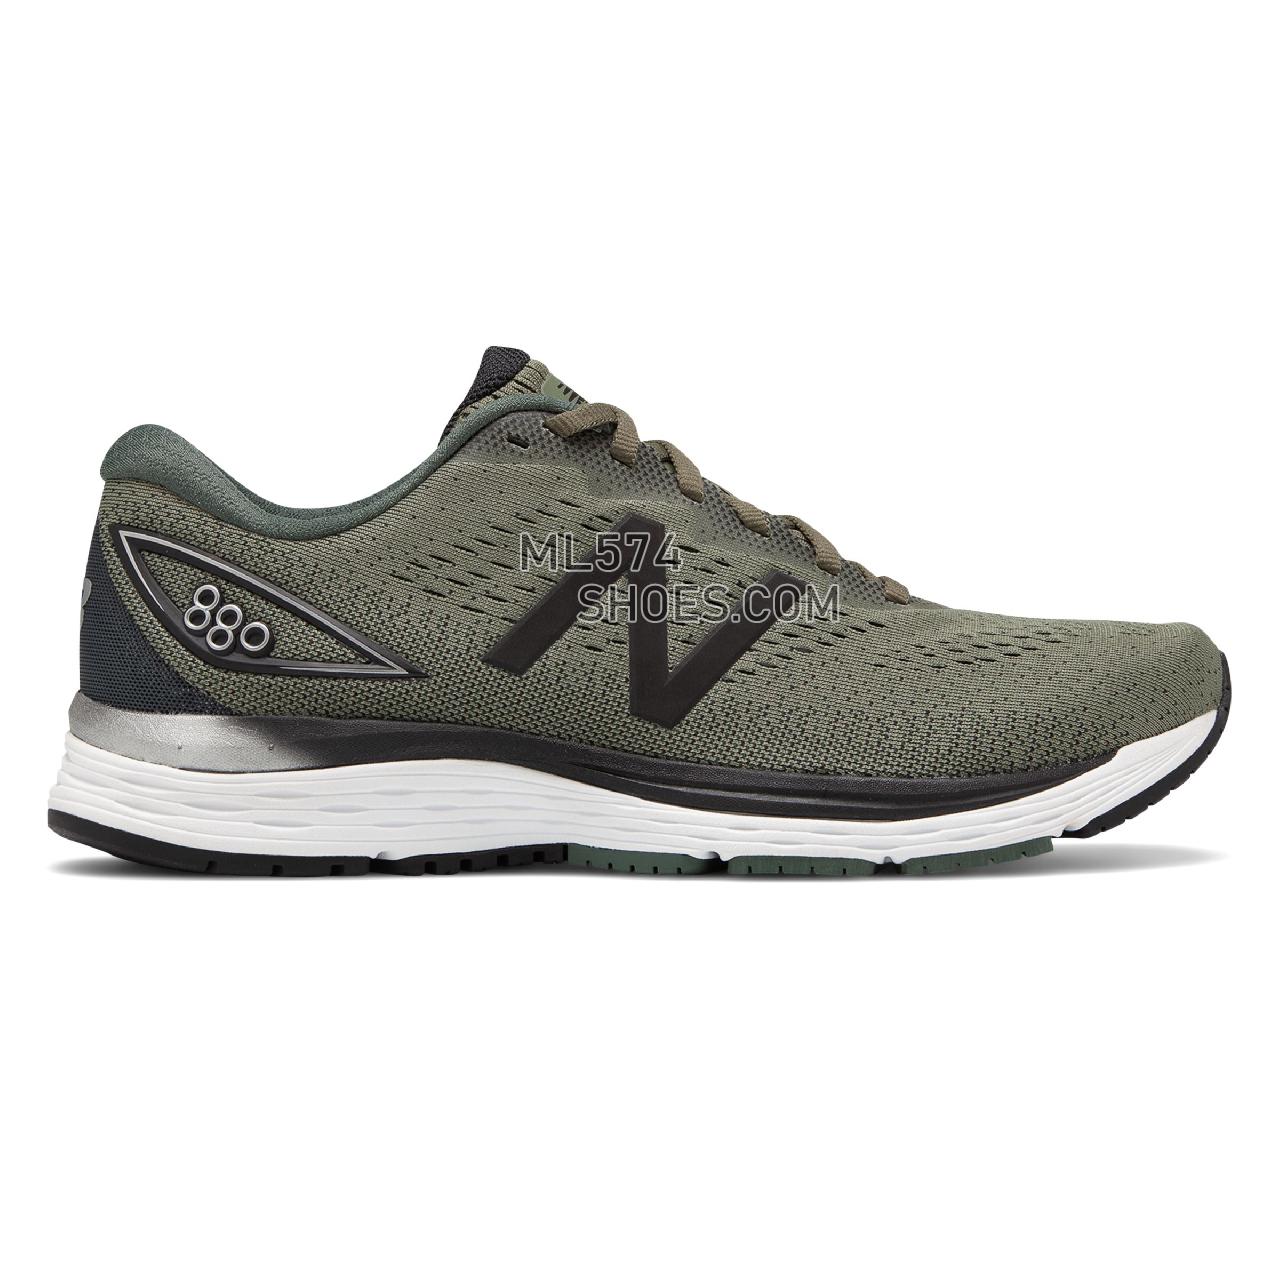 New Balance 880v9 - Men's Neutral Running - Mineral Green with Black - M880MG9